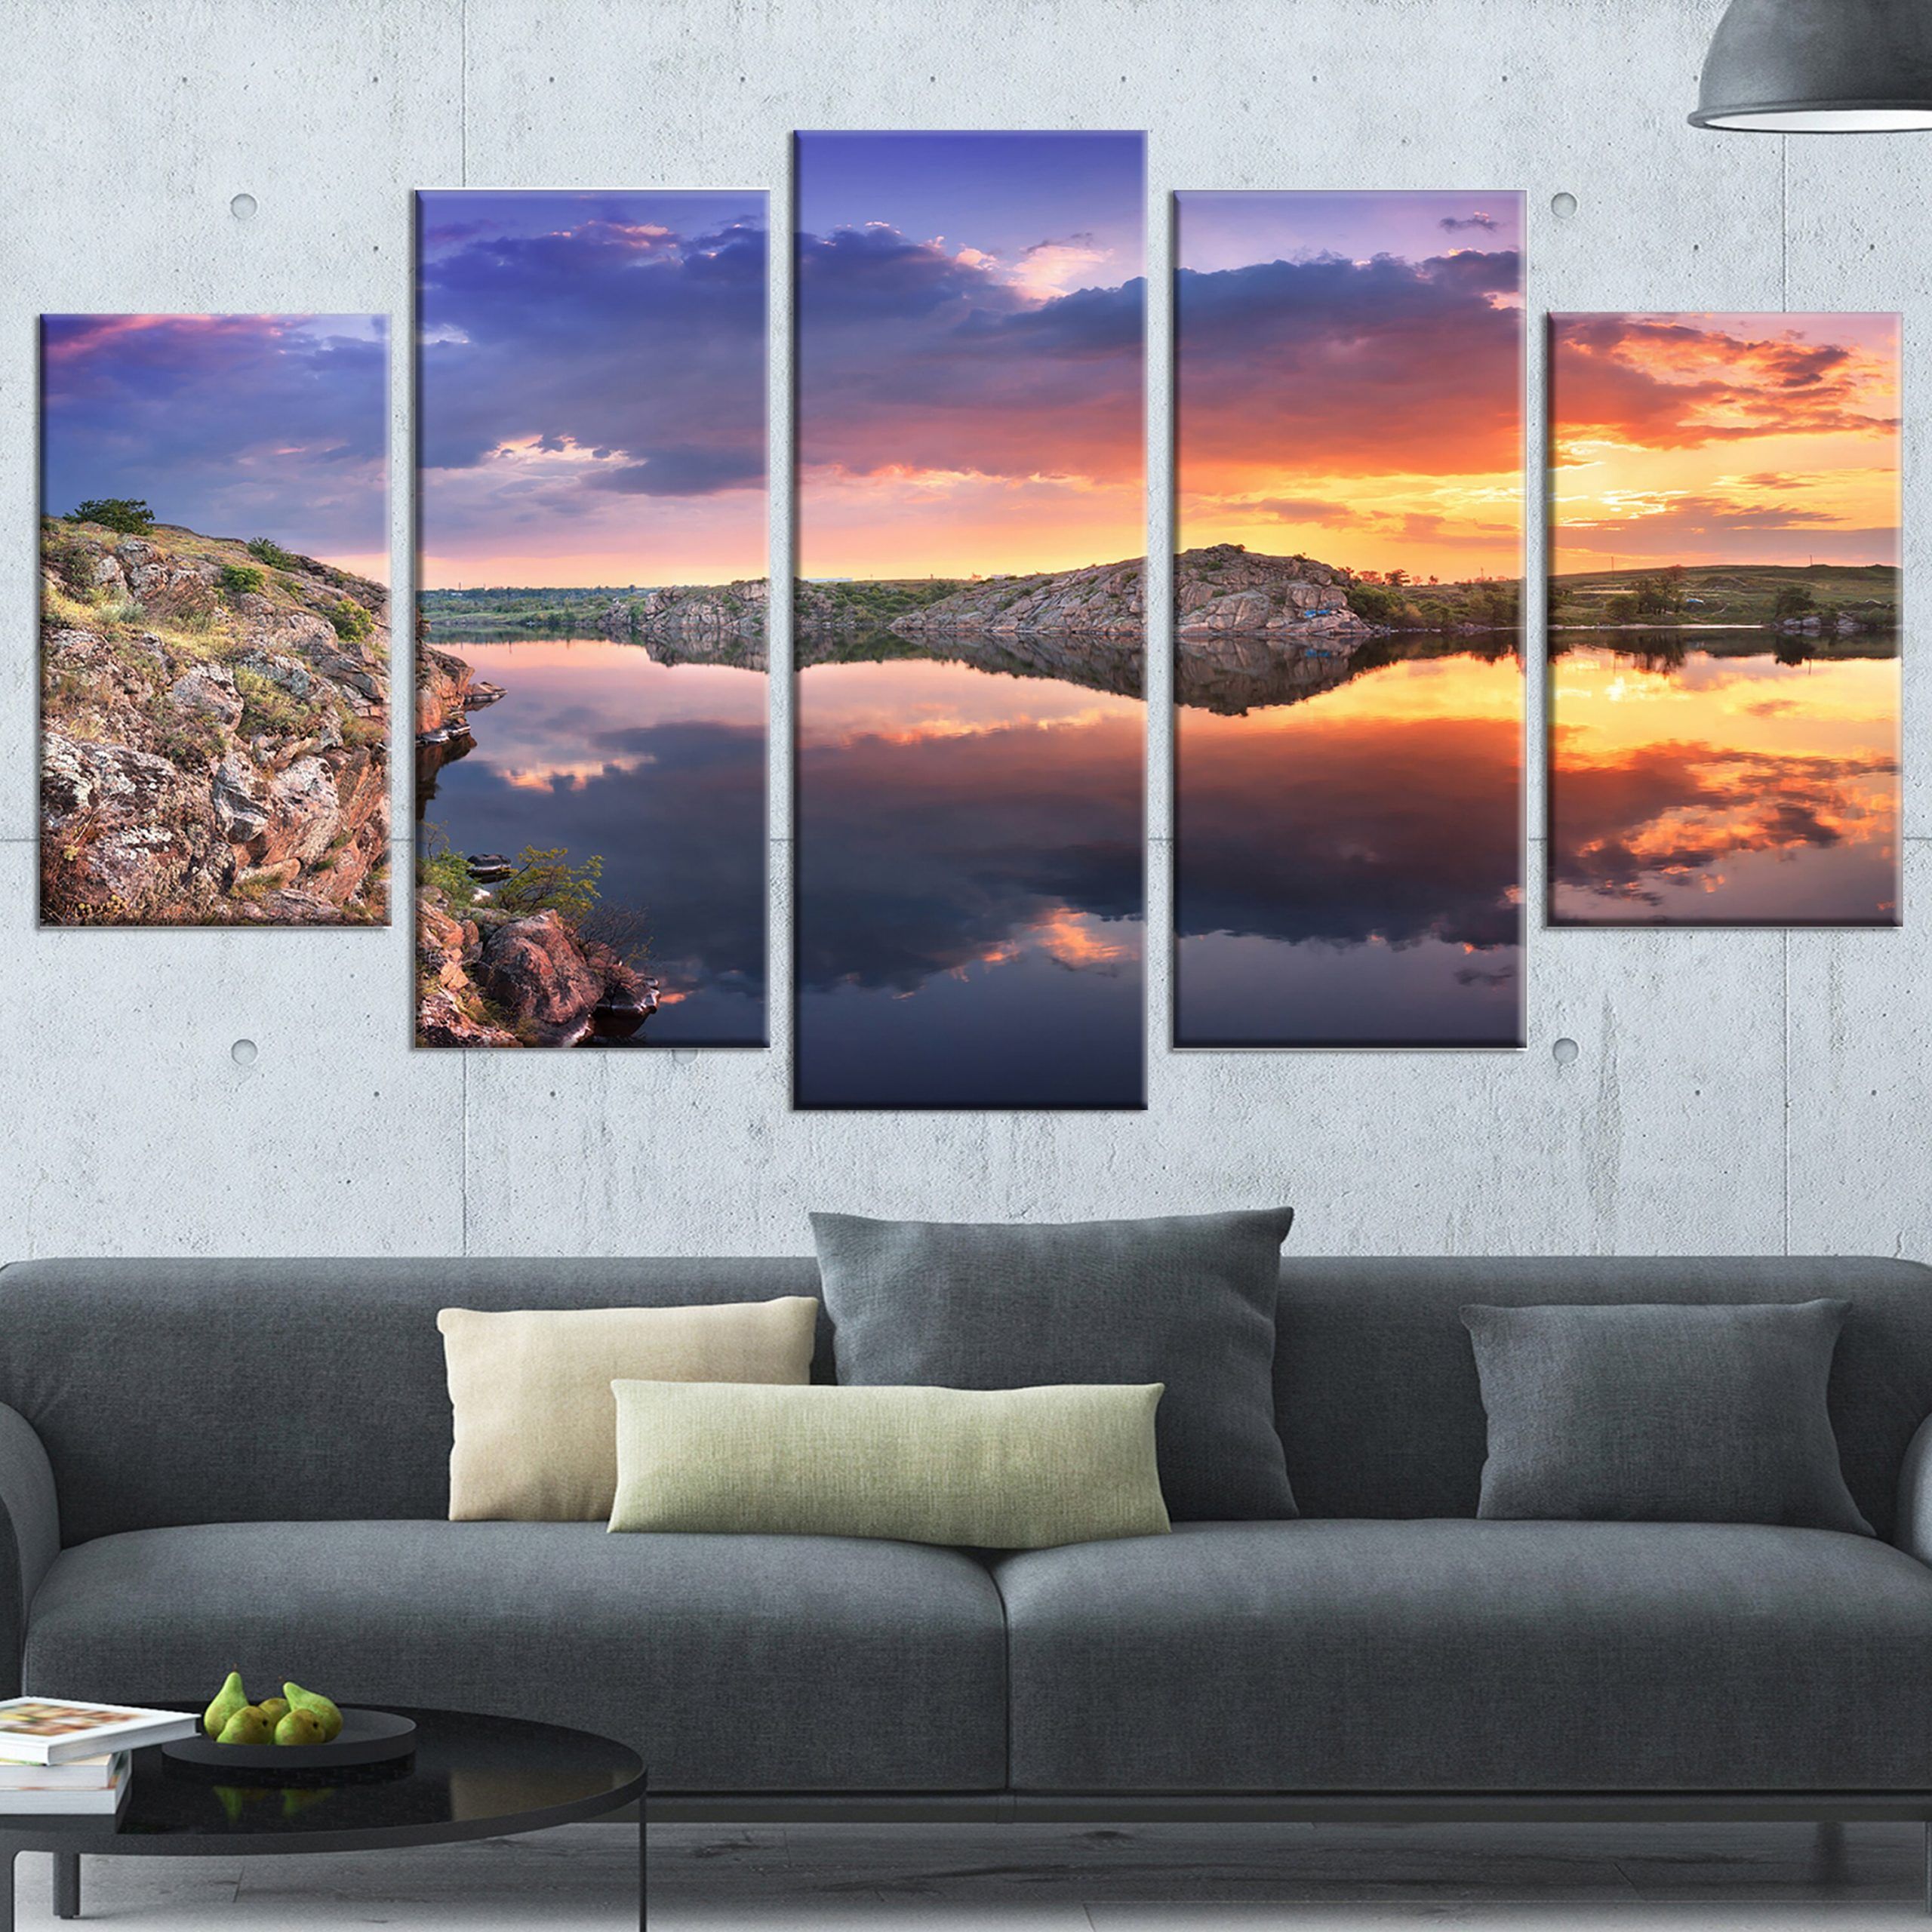 Designart 'large Summer Clouds Reflection' 5 Piece Wall Within Most Recent Summer Wall Art (View 1 of 20)